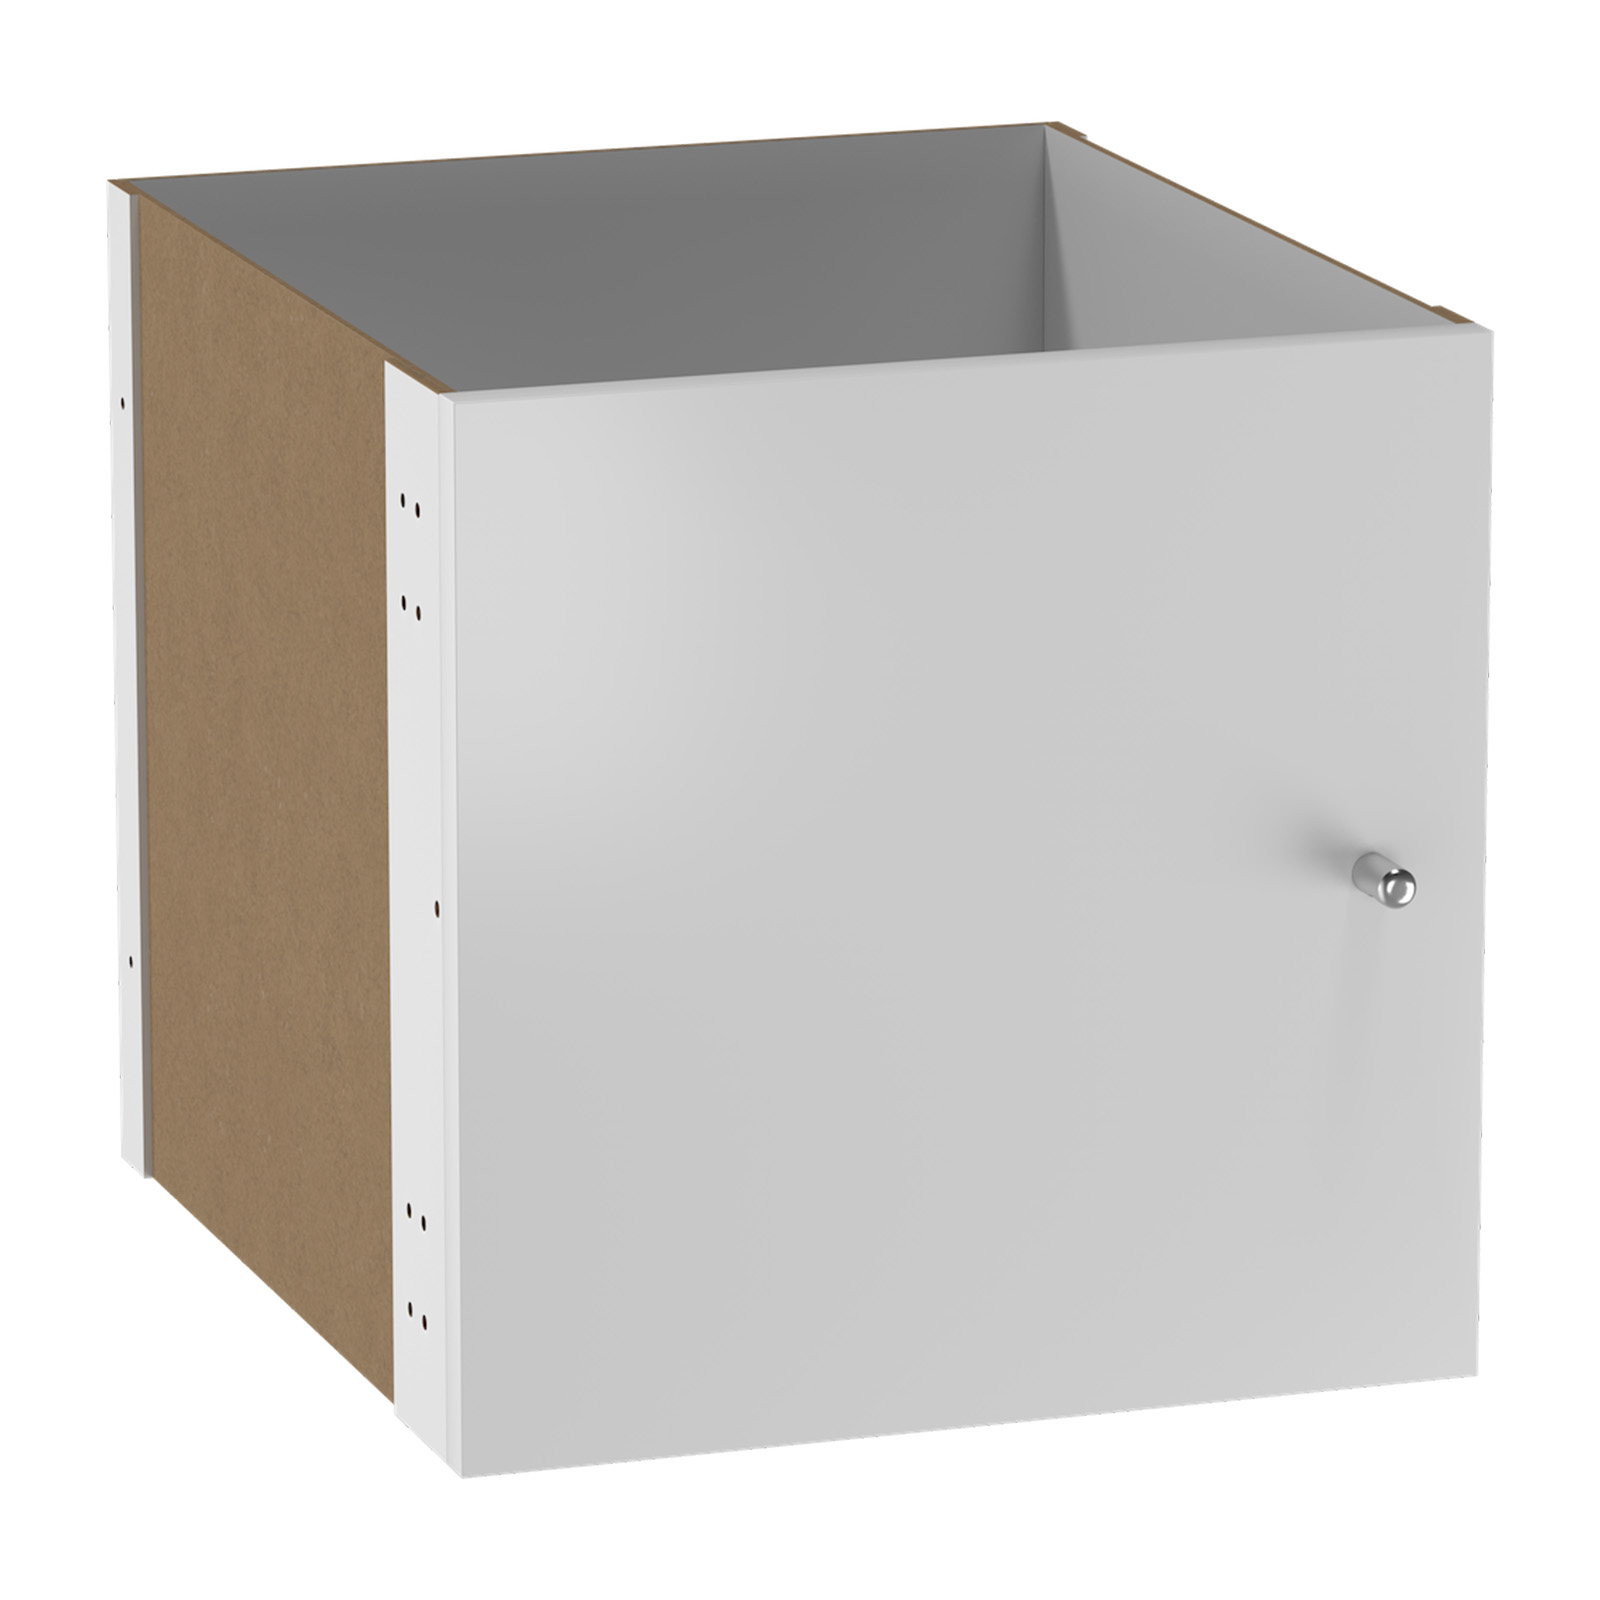 Clever Cube Timber Insert 1 Door White High Gloss